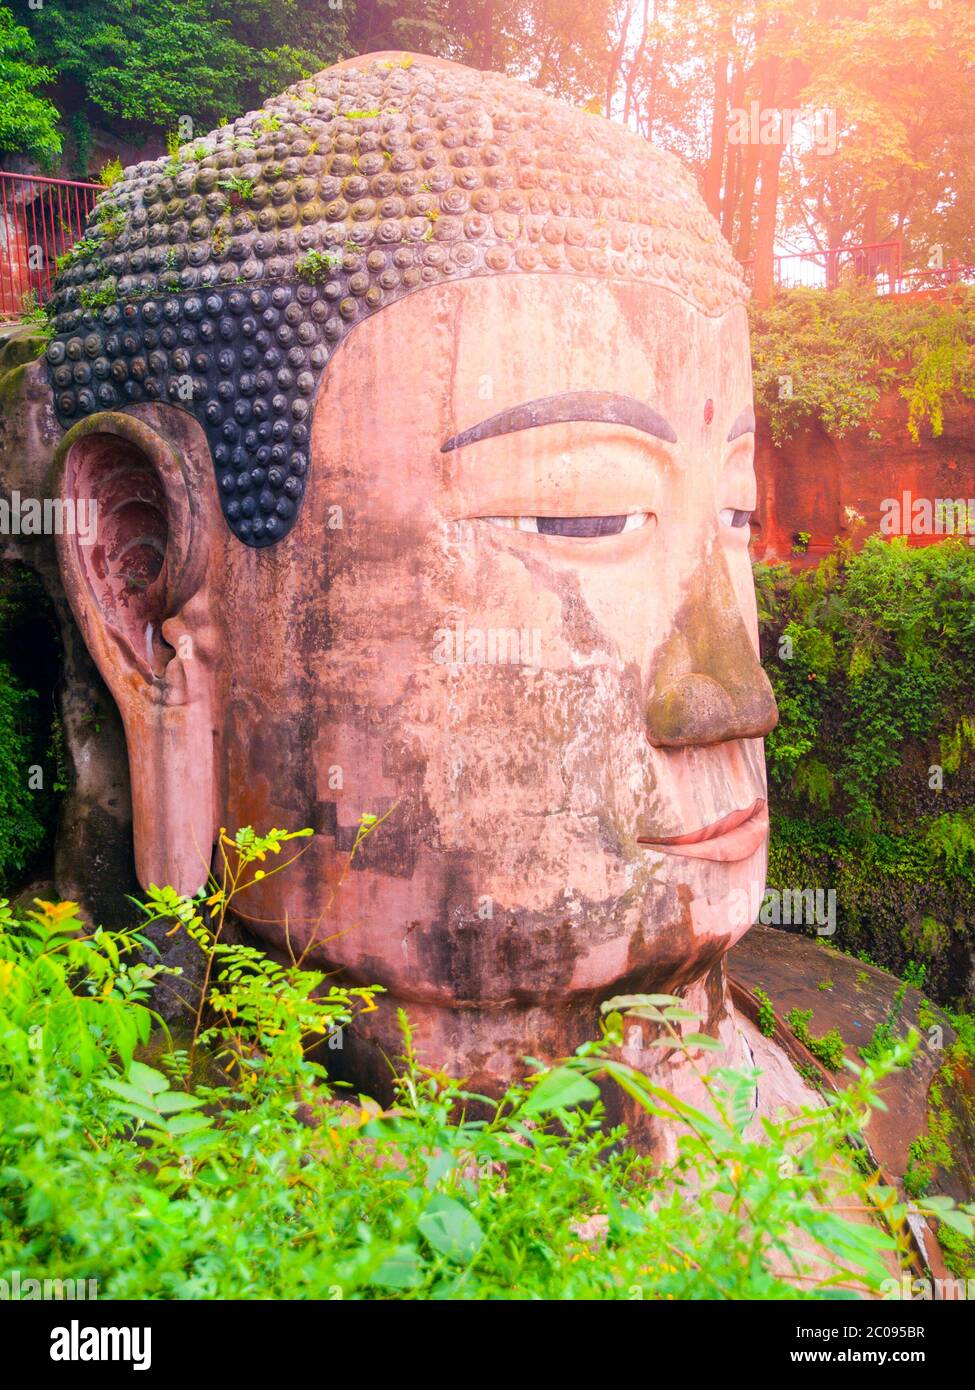 Close-up view of Dafo - Giant Buddha statue in Leshan, Sichuan Province, China. Stock Photo